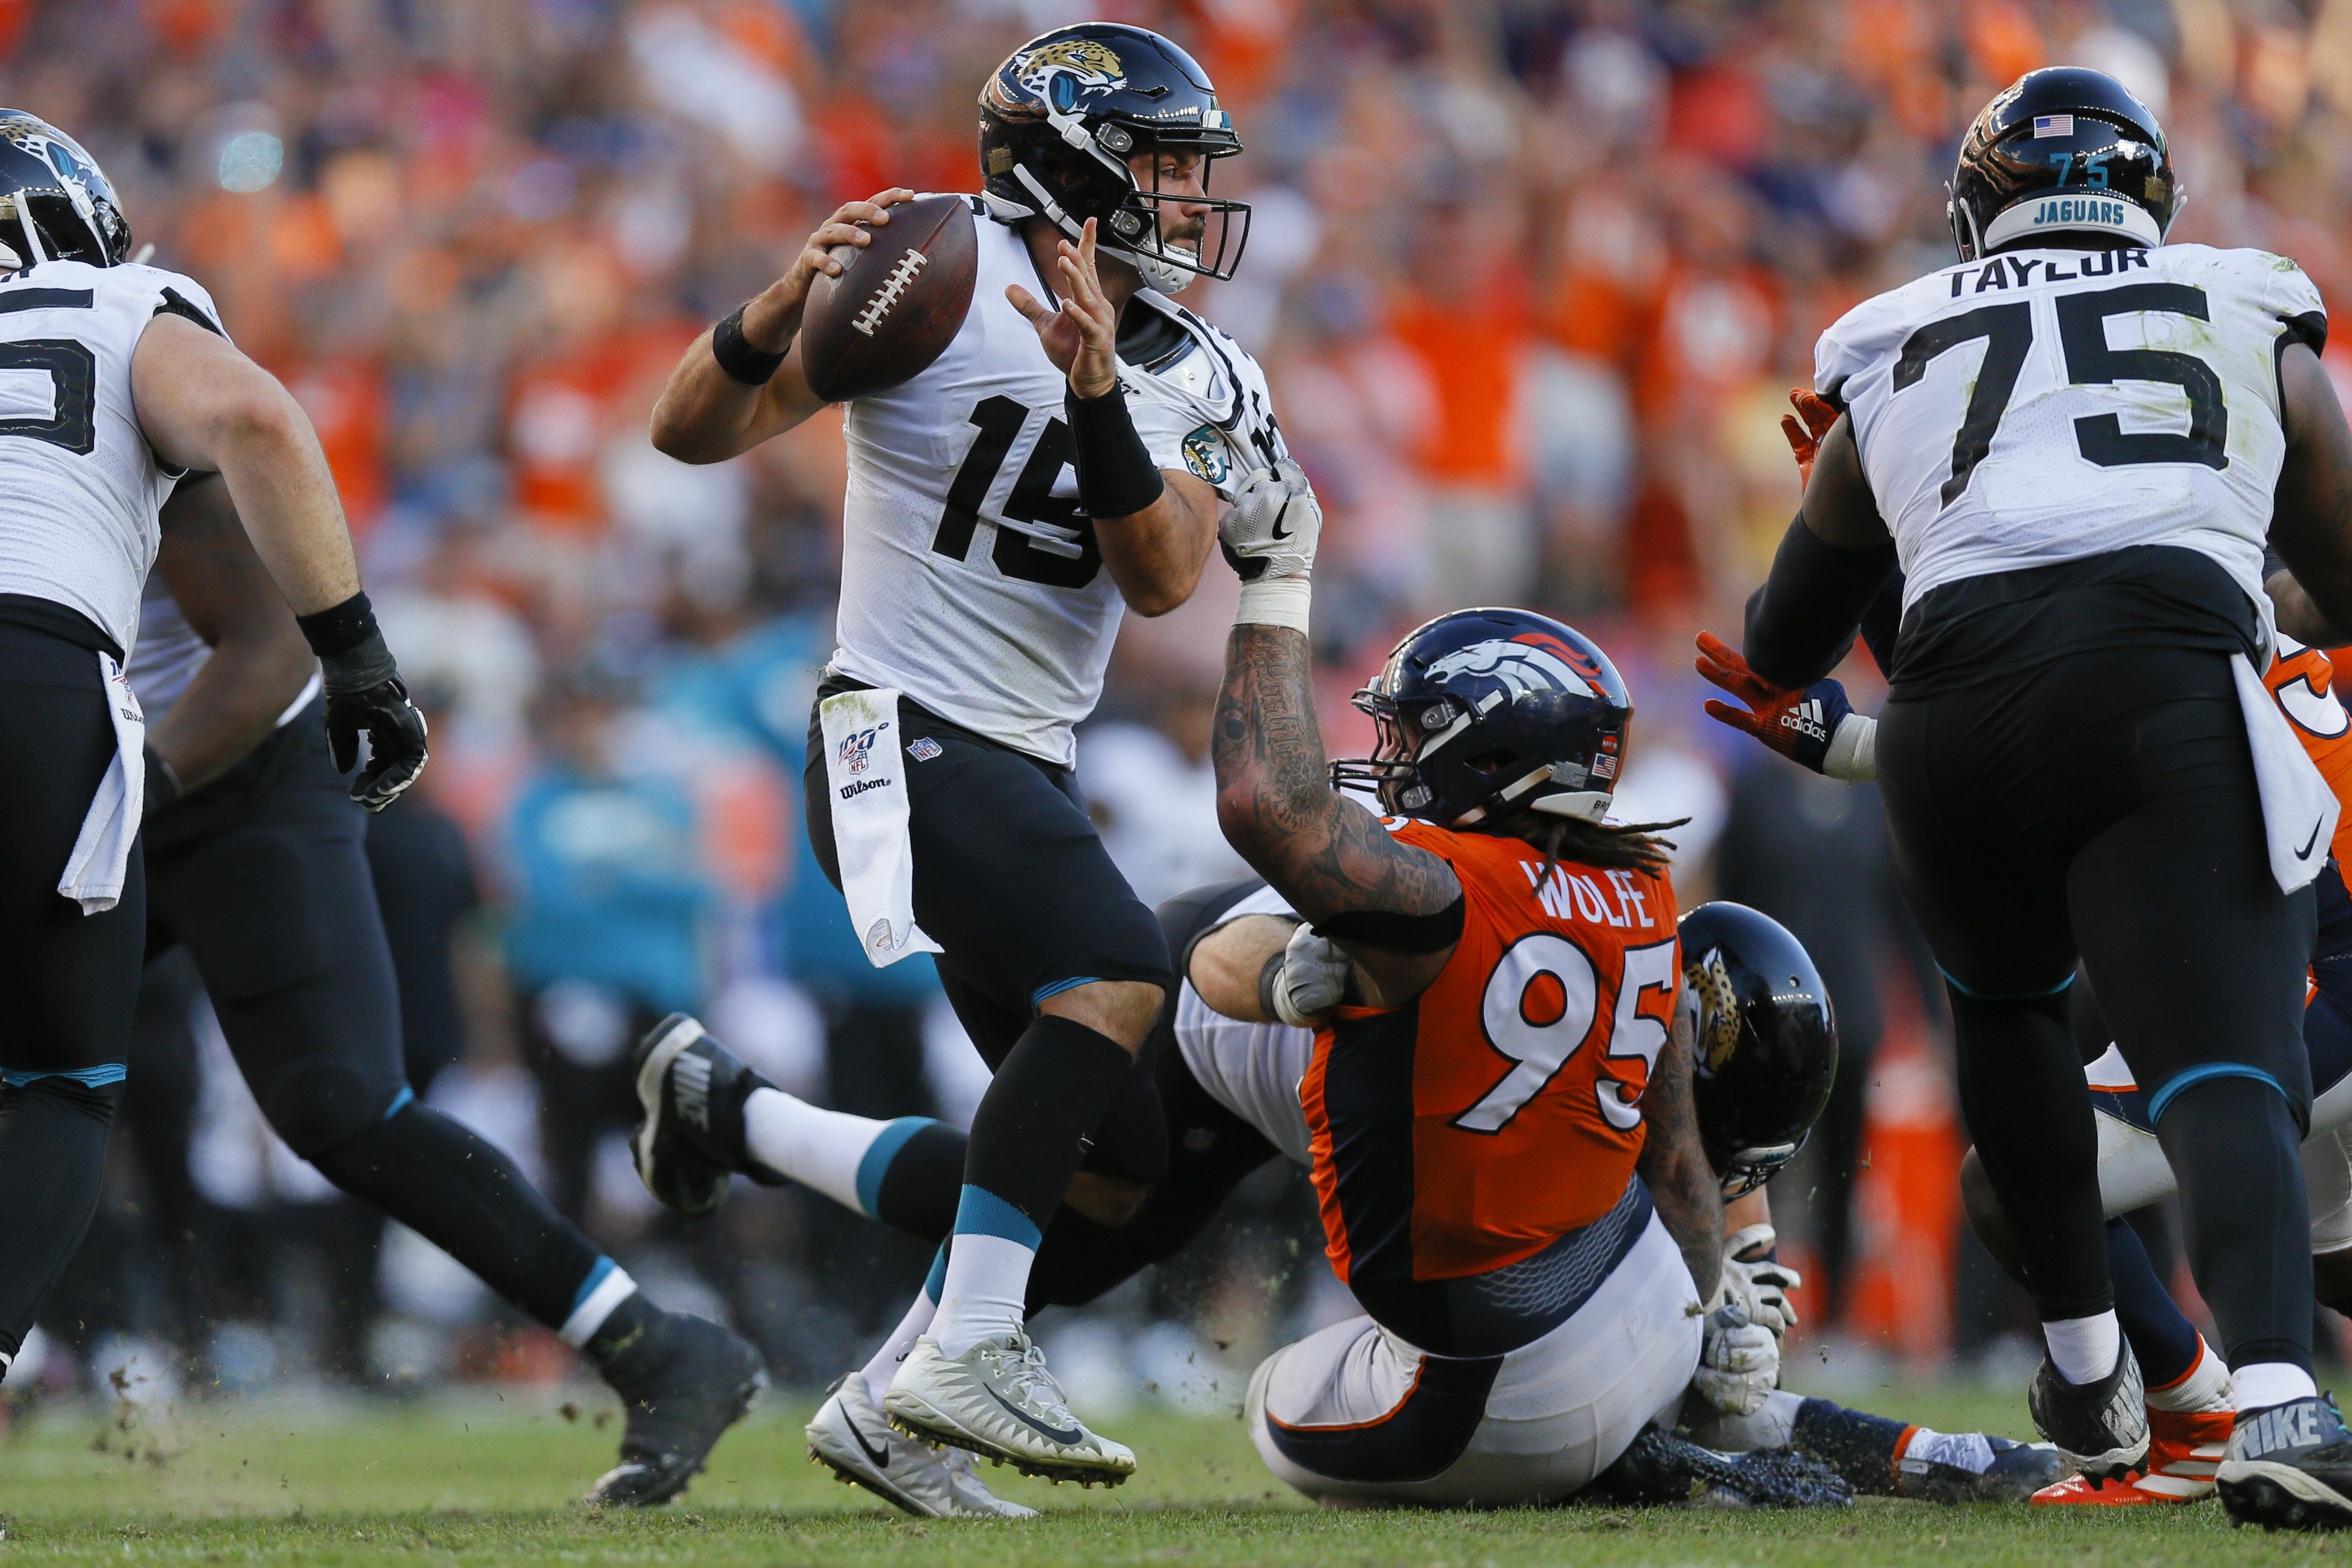 Quarterback Gardner Minshew of the Jacksonville Jaguars tries to escape while being held by defensive end Derek Wolfe of the Denver Broncos during the fourth quarter on Sunday.